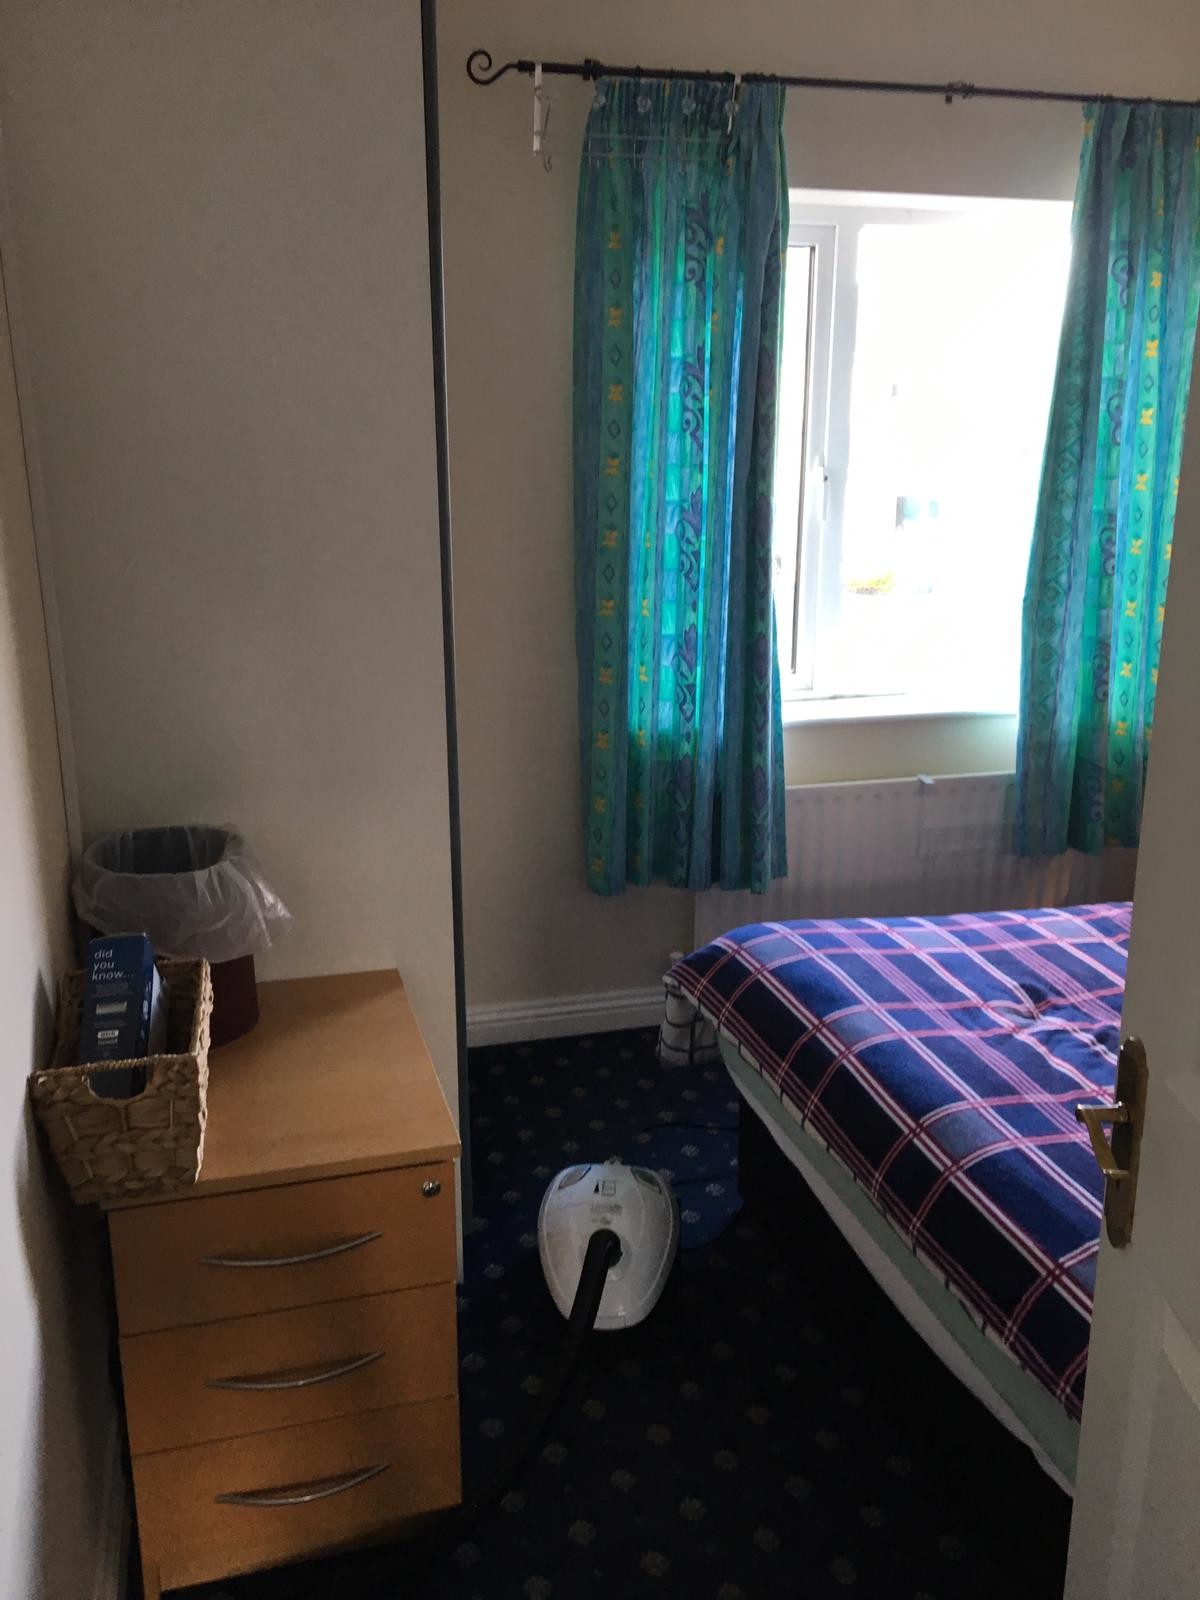 Room For Rent In 2 Bedroom Apartment In Galway